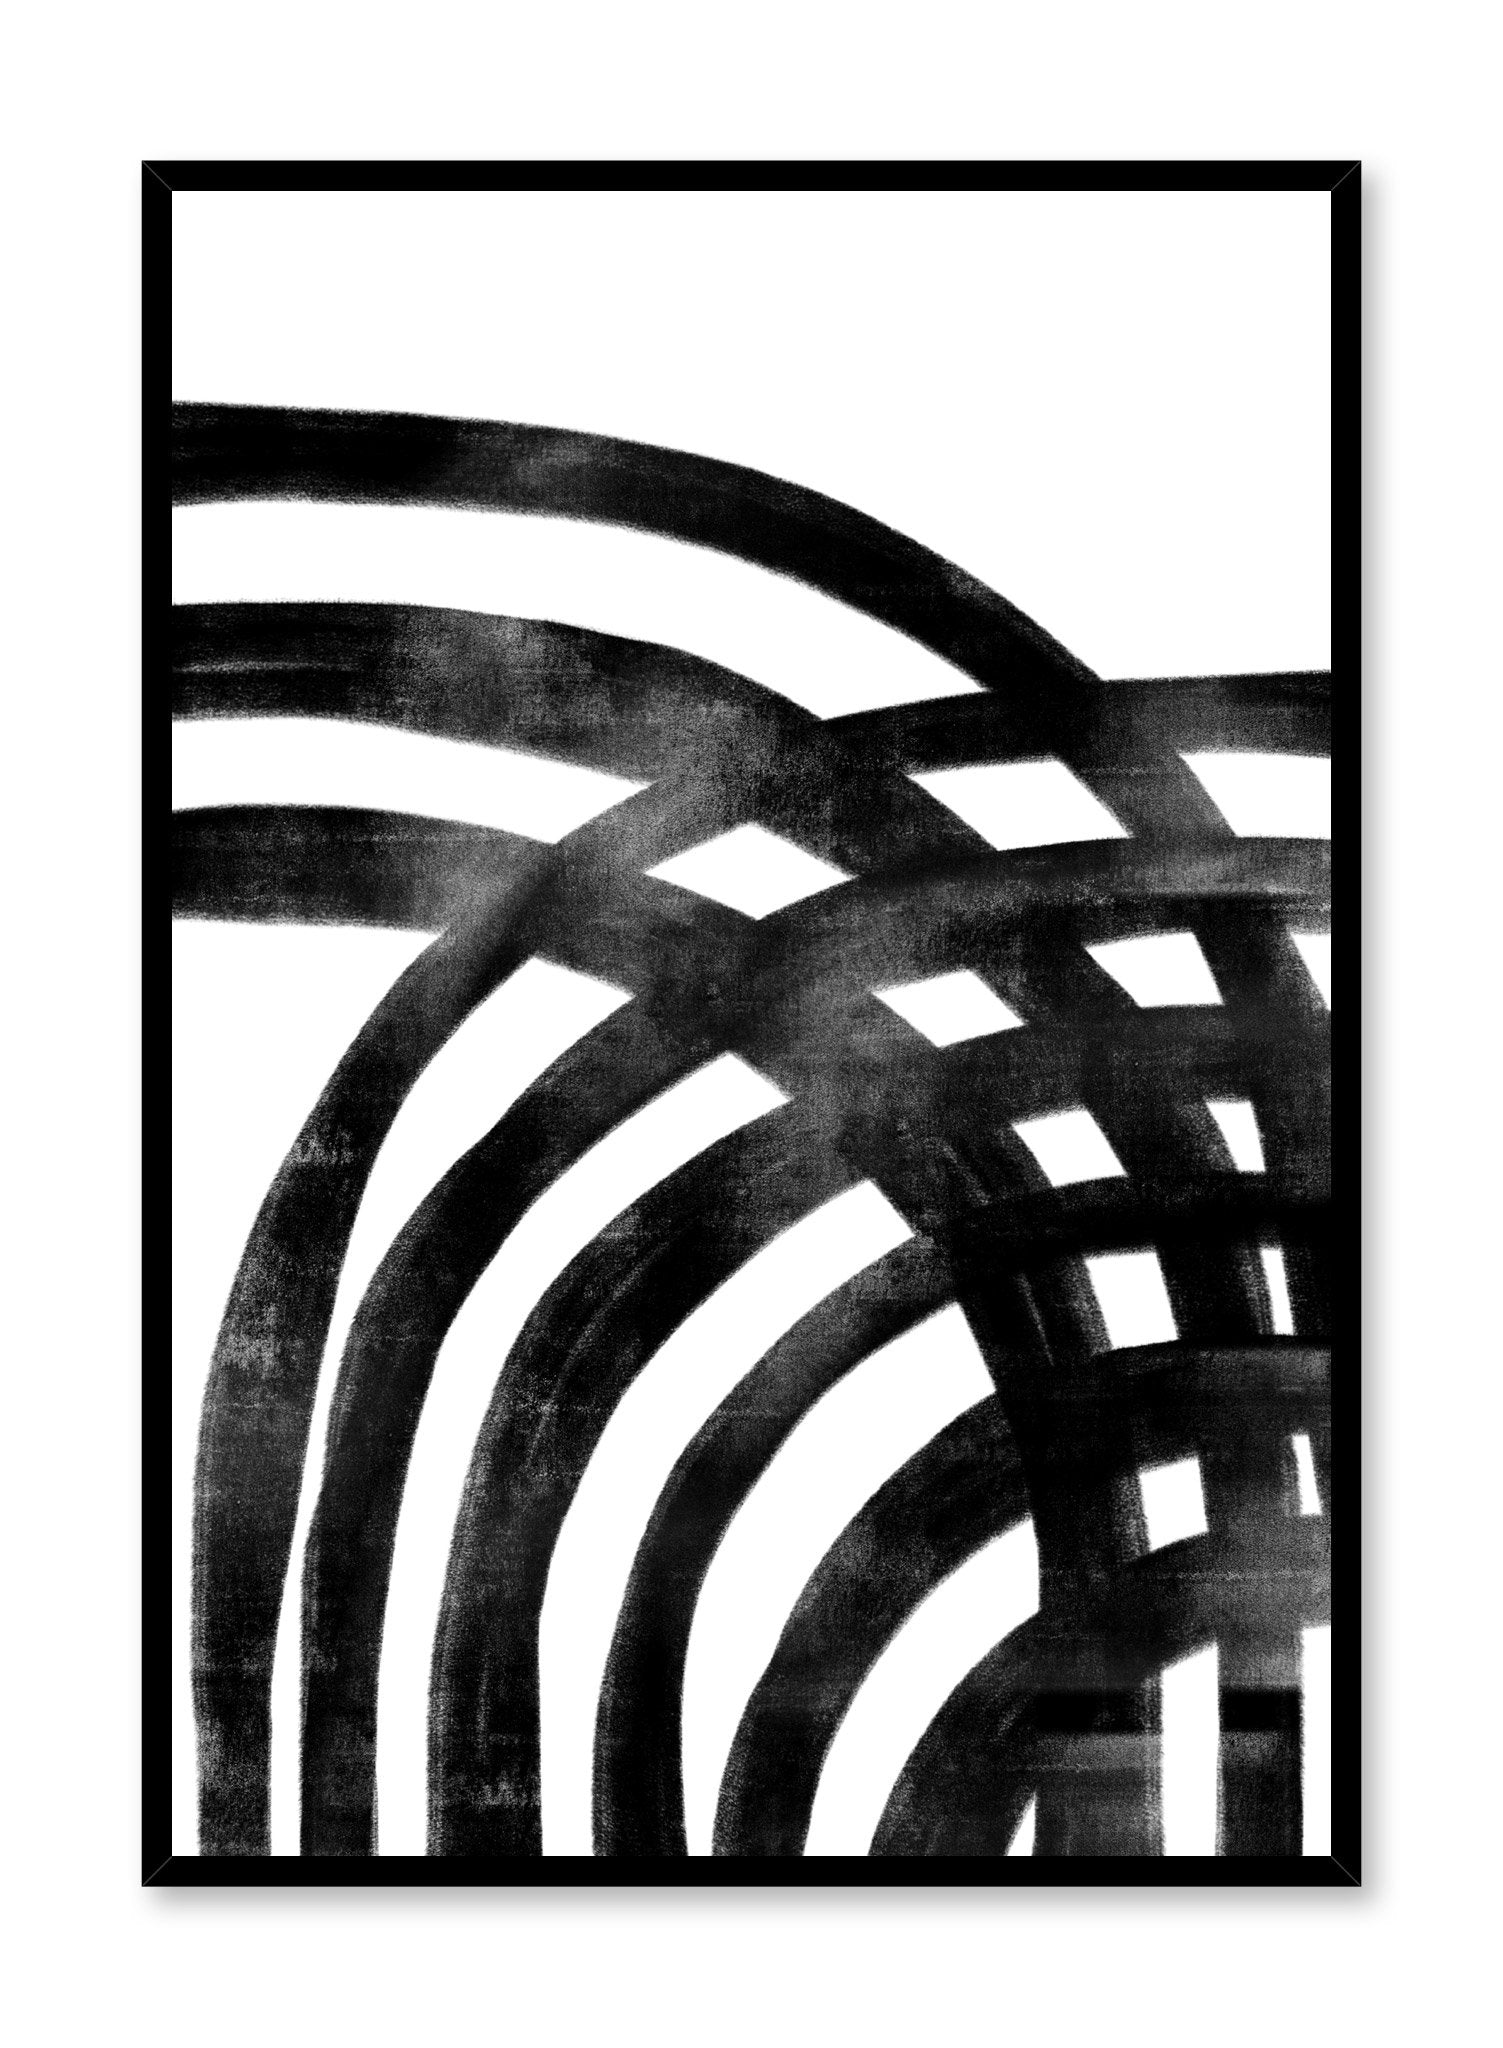 Modern minimalist poster by Opposite Wall with black and white crosshatch design illustration